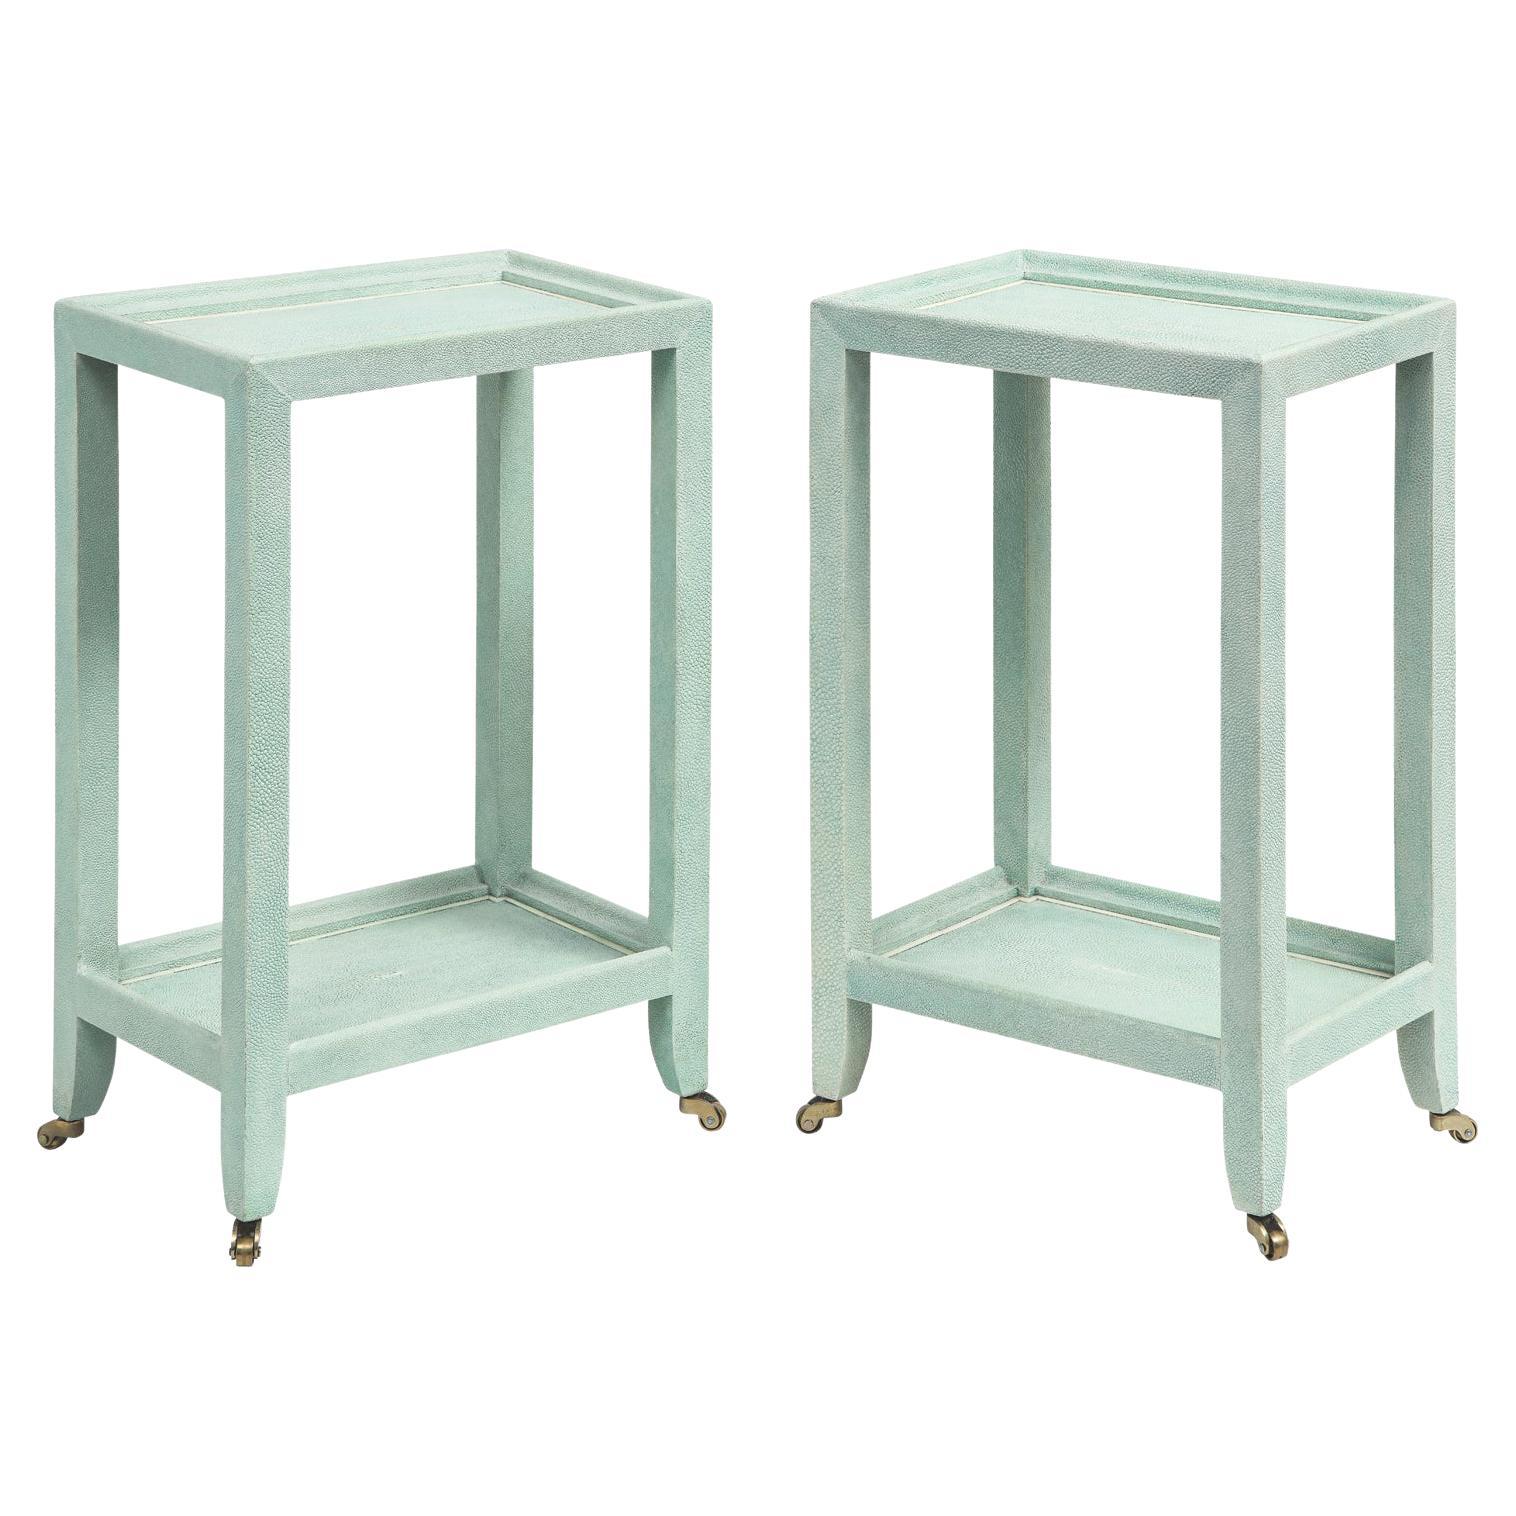 Karl Springer Pair of "Telephone Style Tables" in Mint Shagreen 2002 'Signed'